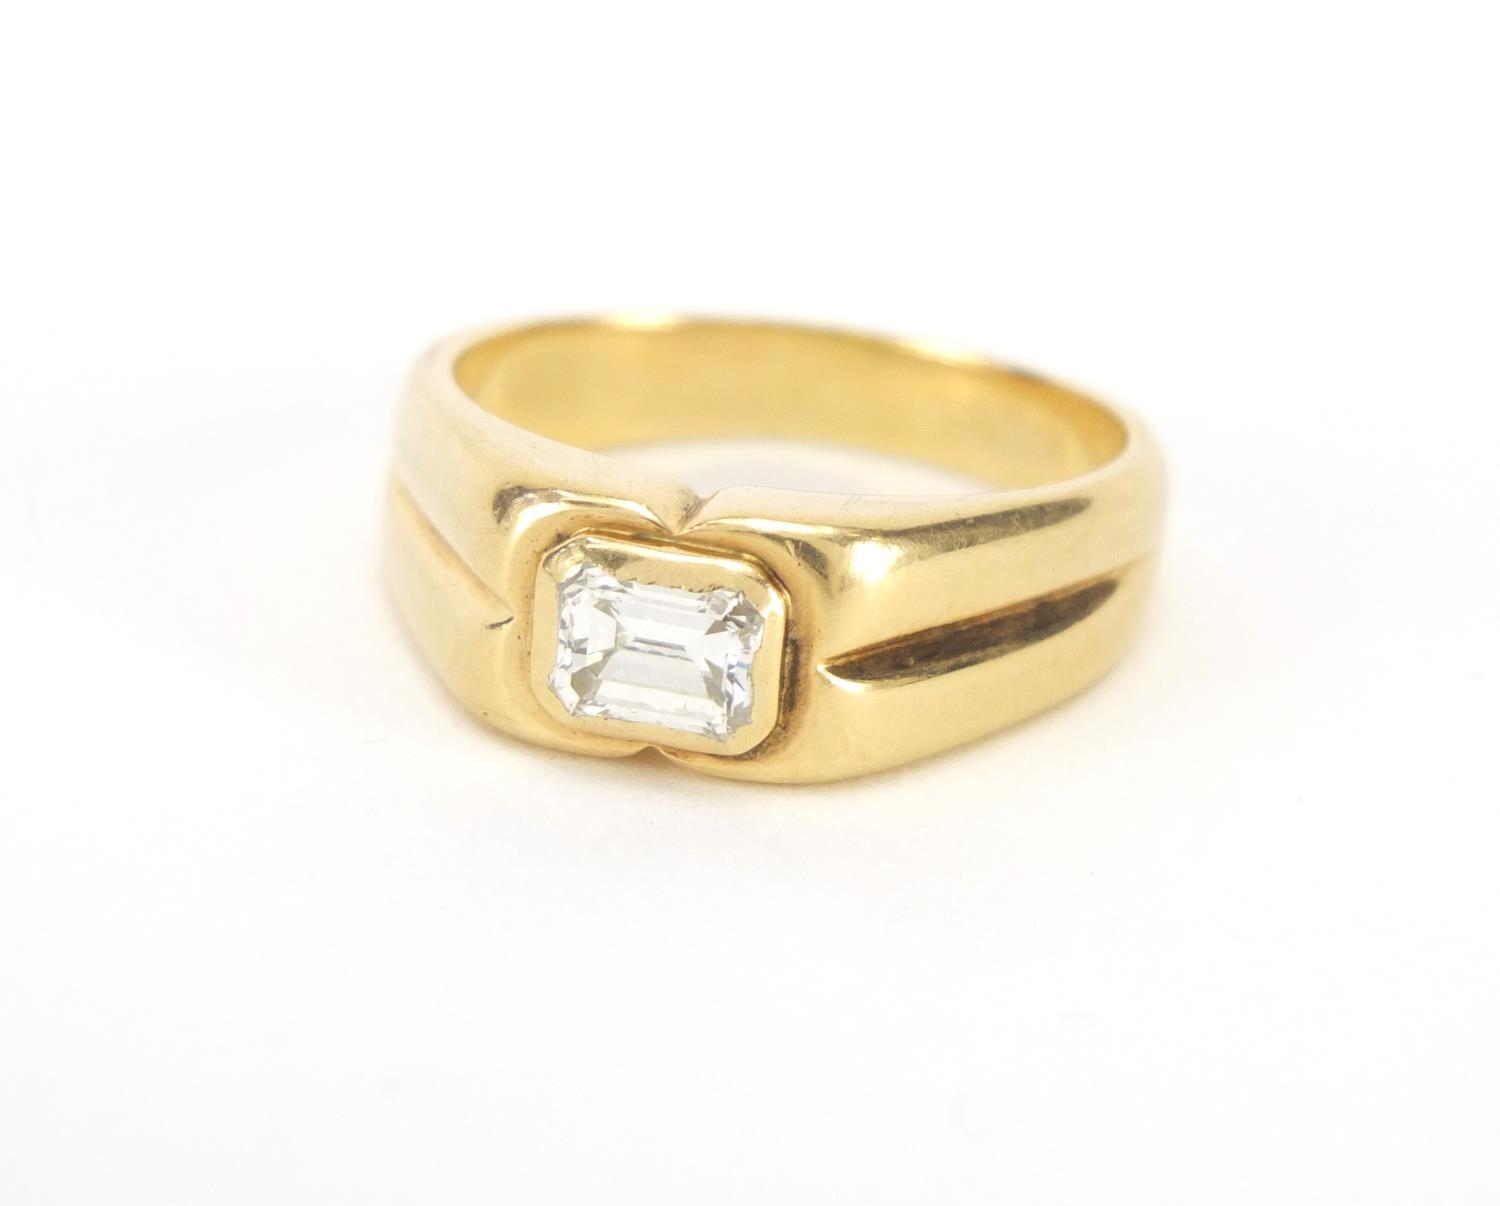 18ct gold baguette diamond solitaire ring, London 1980, size T, approximate weight 11.8g : For extra